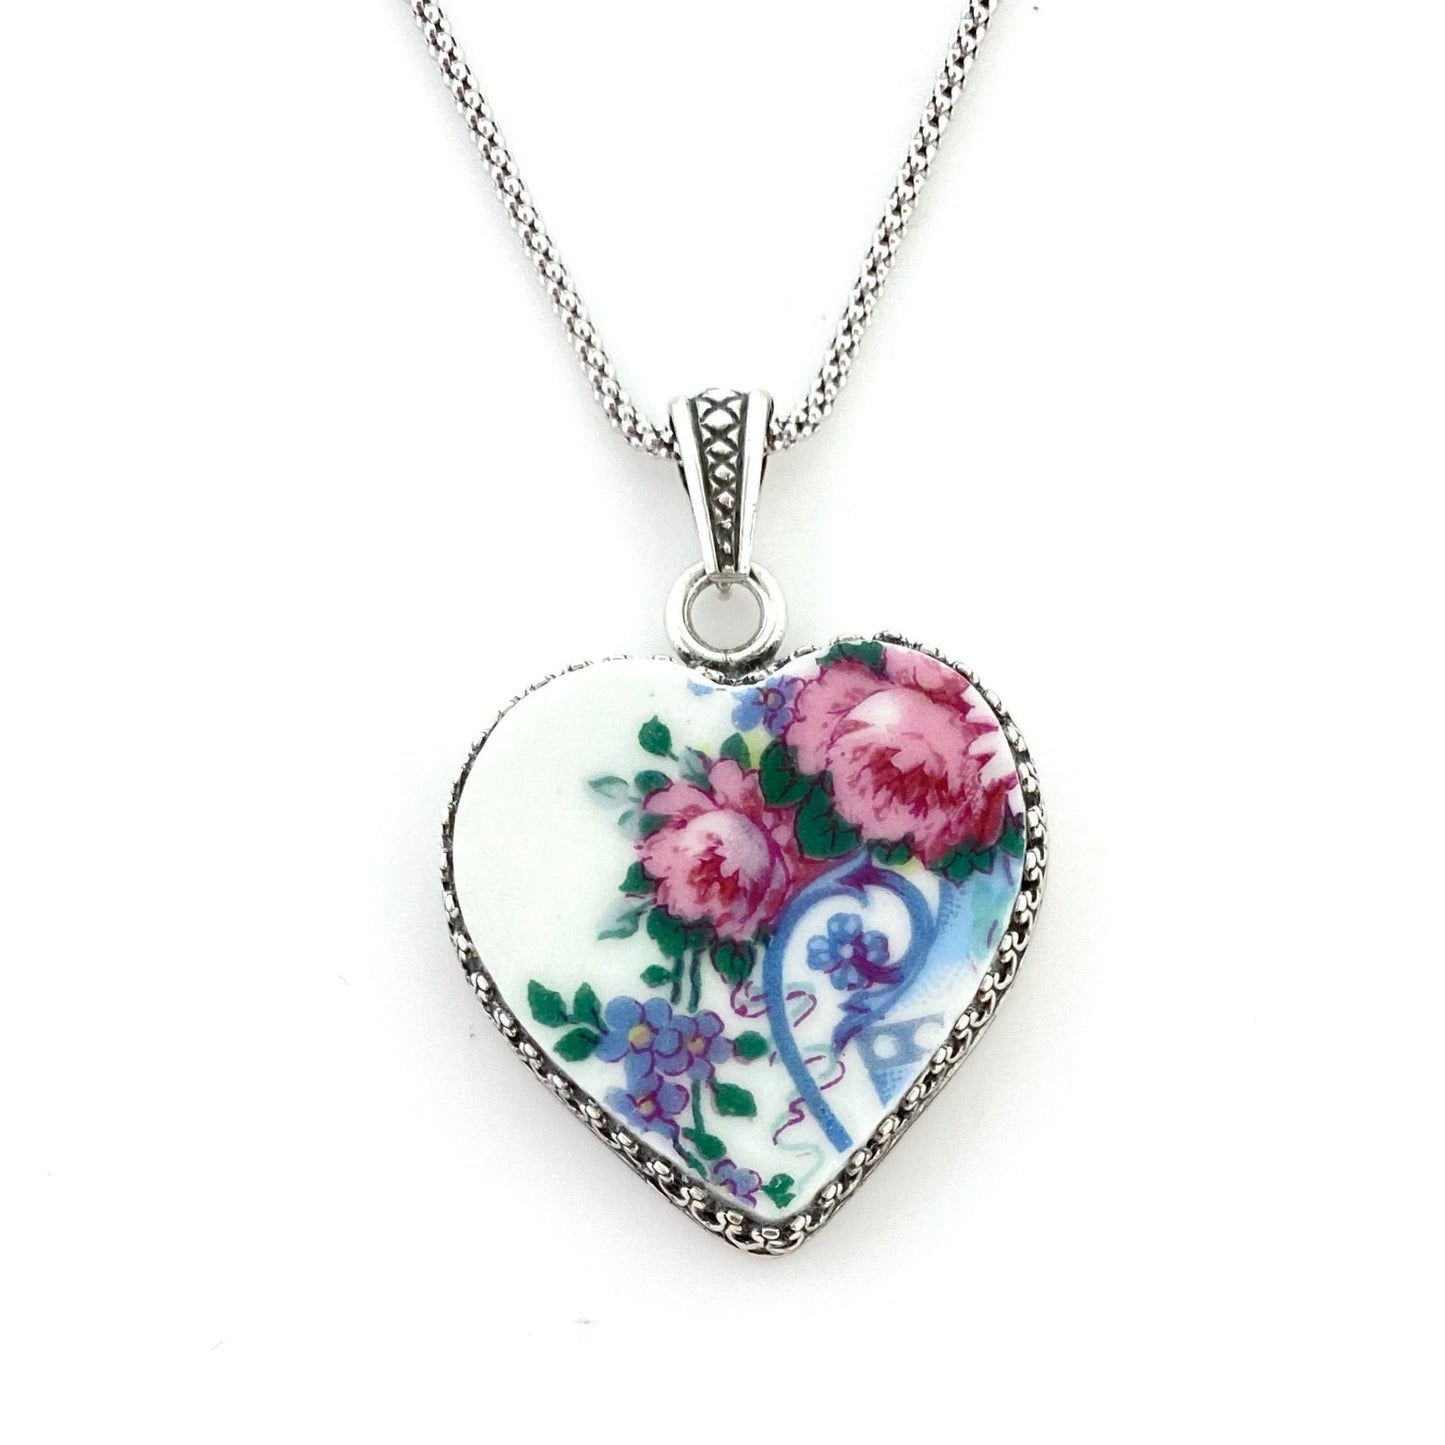 Romantic Rose and Forget Me Not Necklace, 20th Anniversary Gift for Wife, Antique French China Jewelry